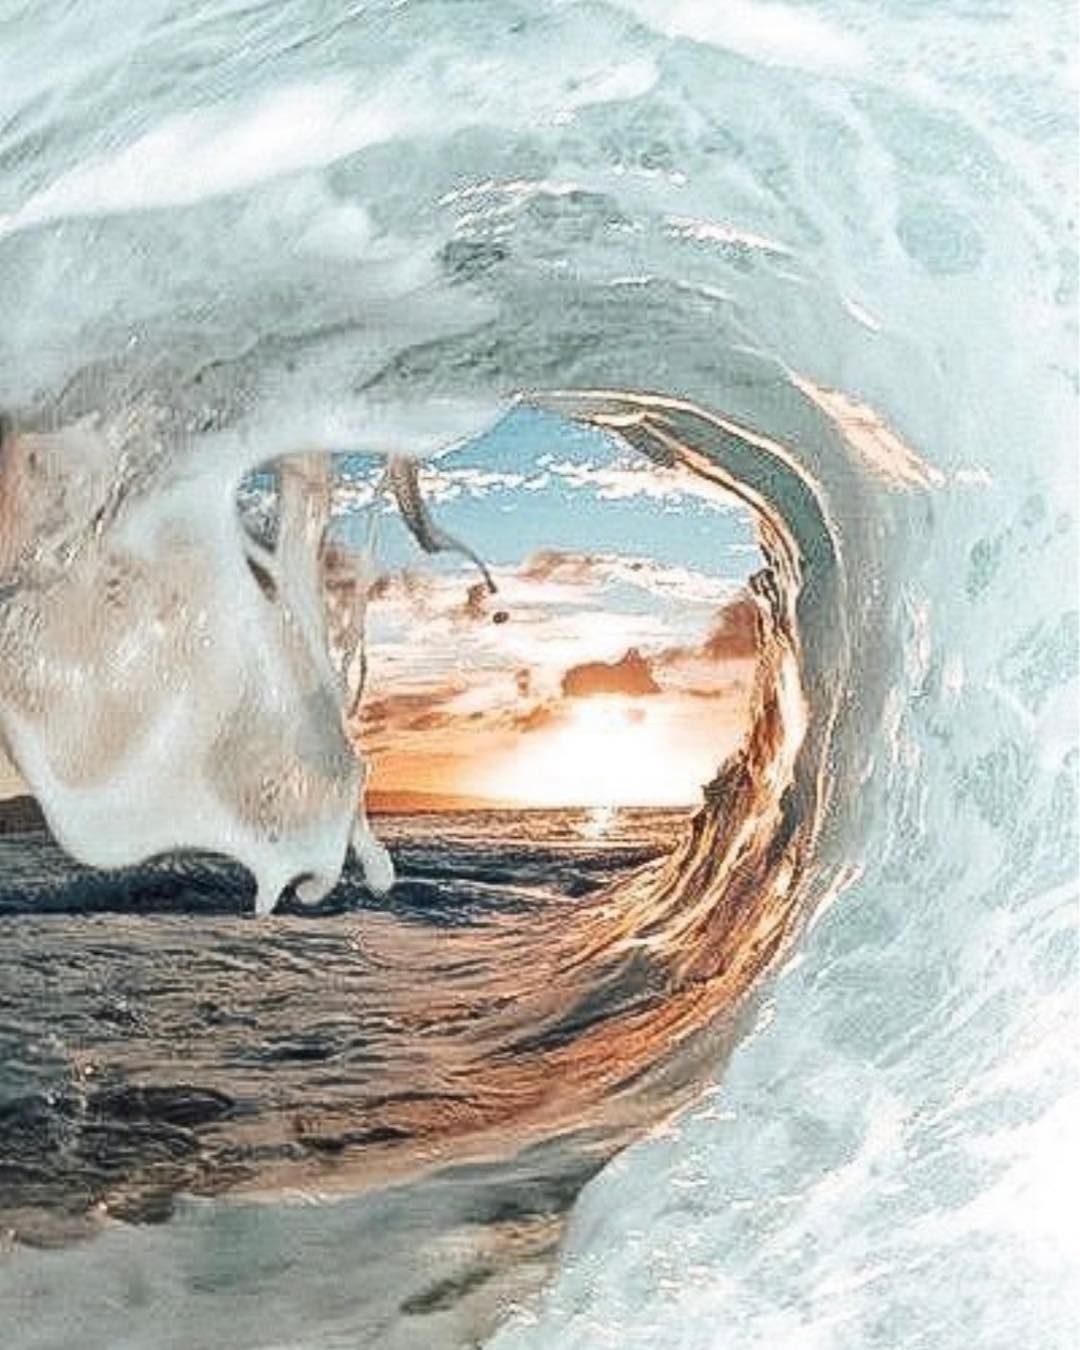 The inside of a wave - Beach, summer, wave